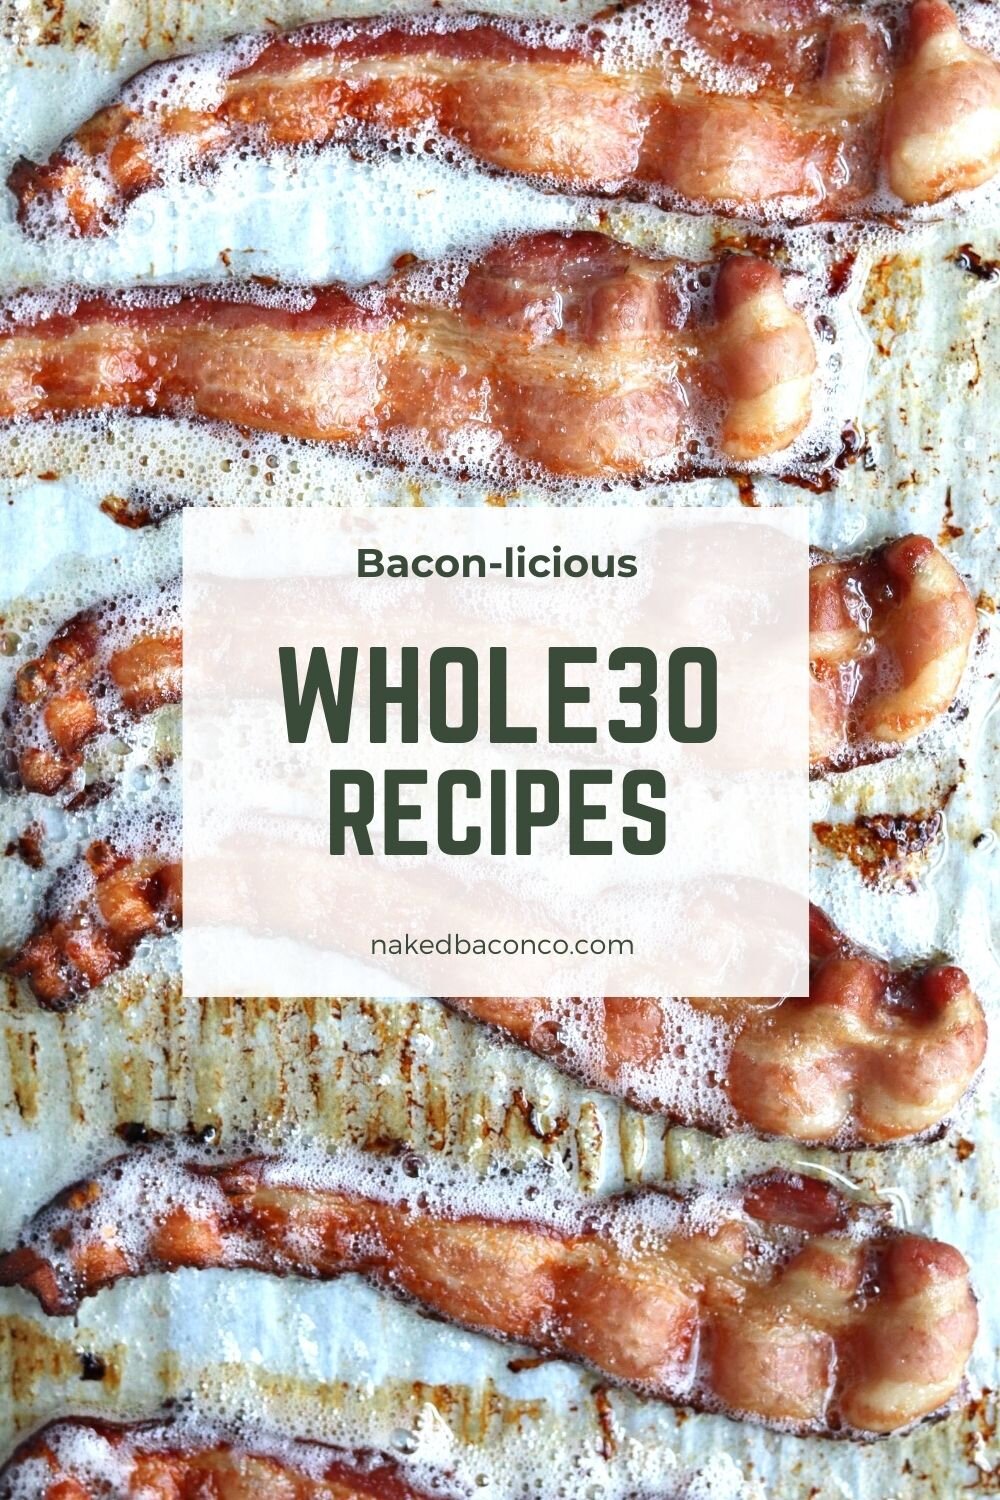 Whole30 Recipes featuring Naked Bacon